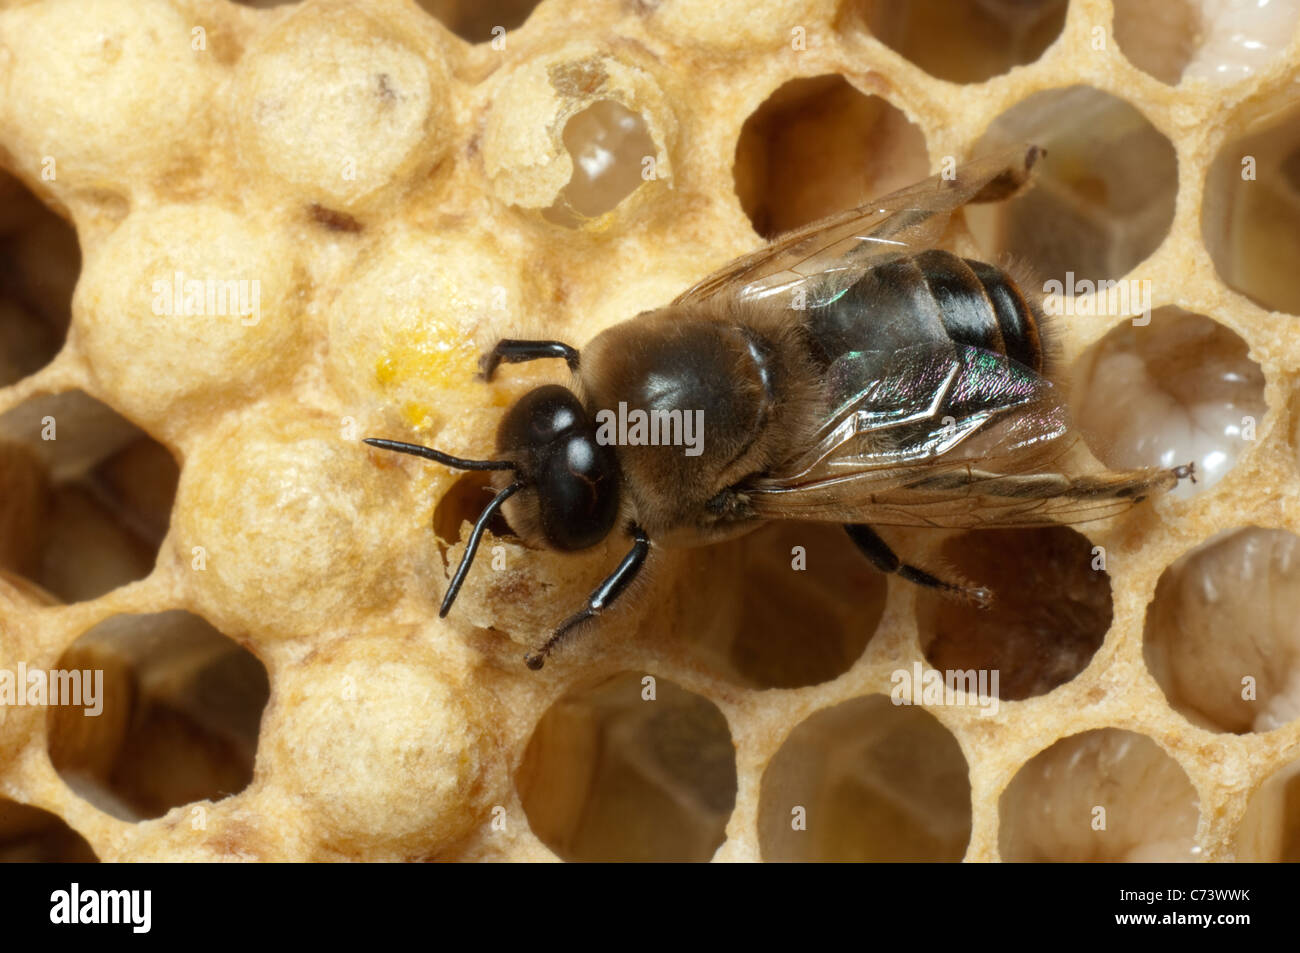 European Honey Bee, Western Honey Bee (Apis mellifera, Apis mellifica). Drone (male) on cells of a honeycomb. Stock Photo